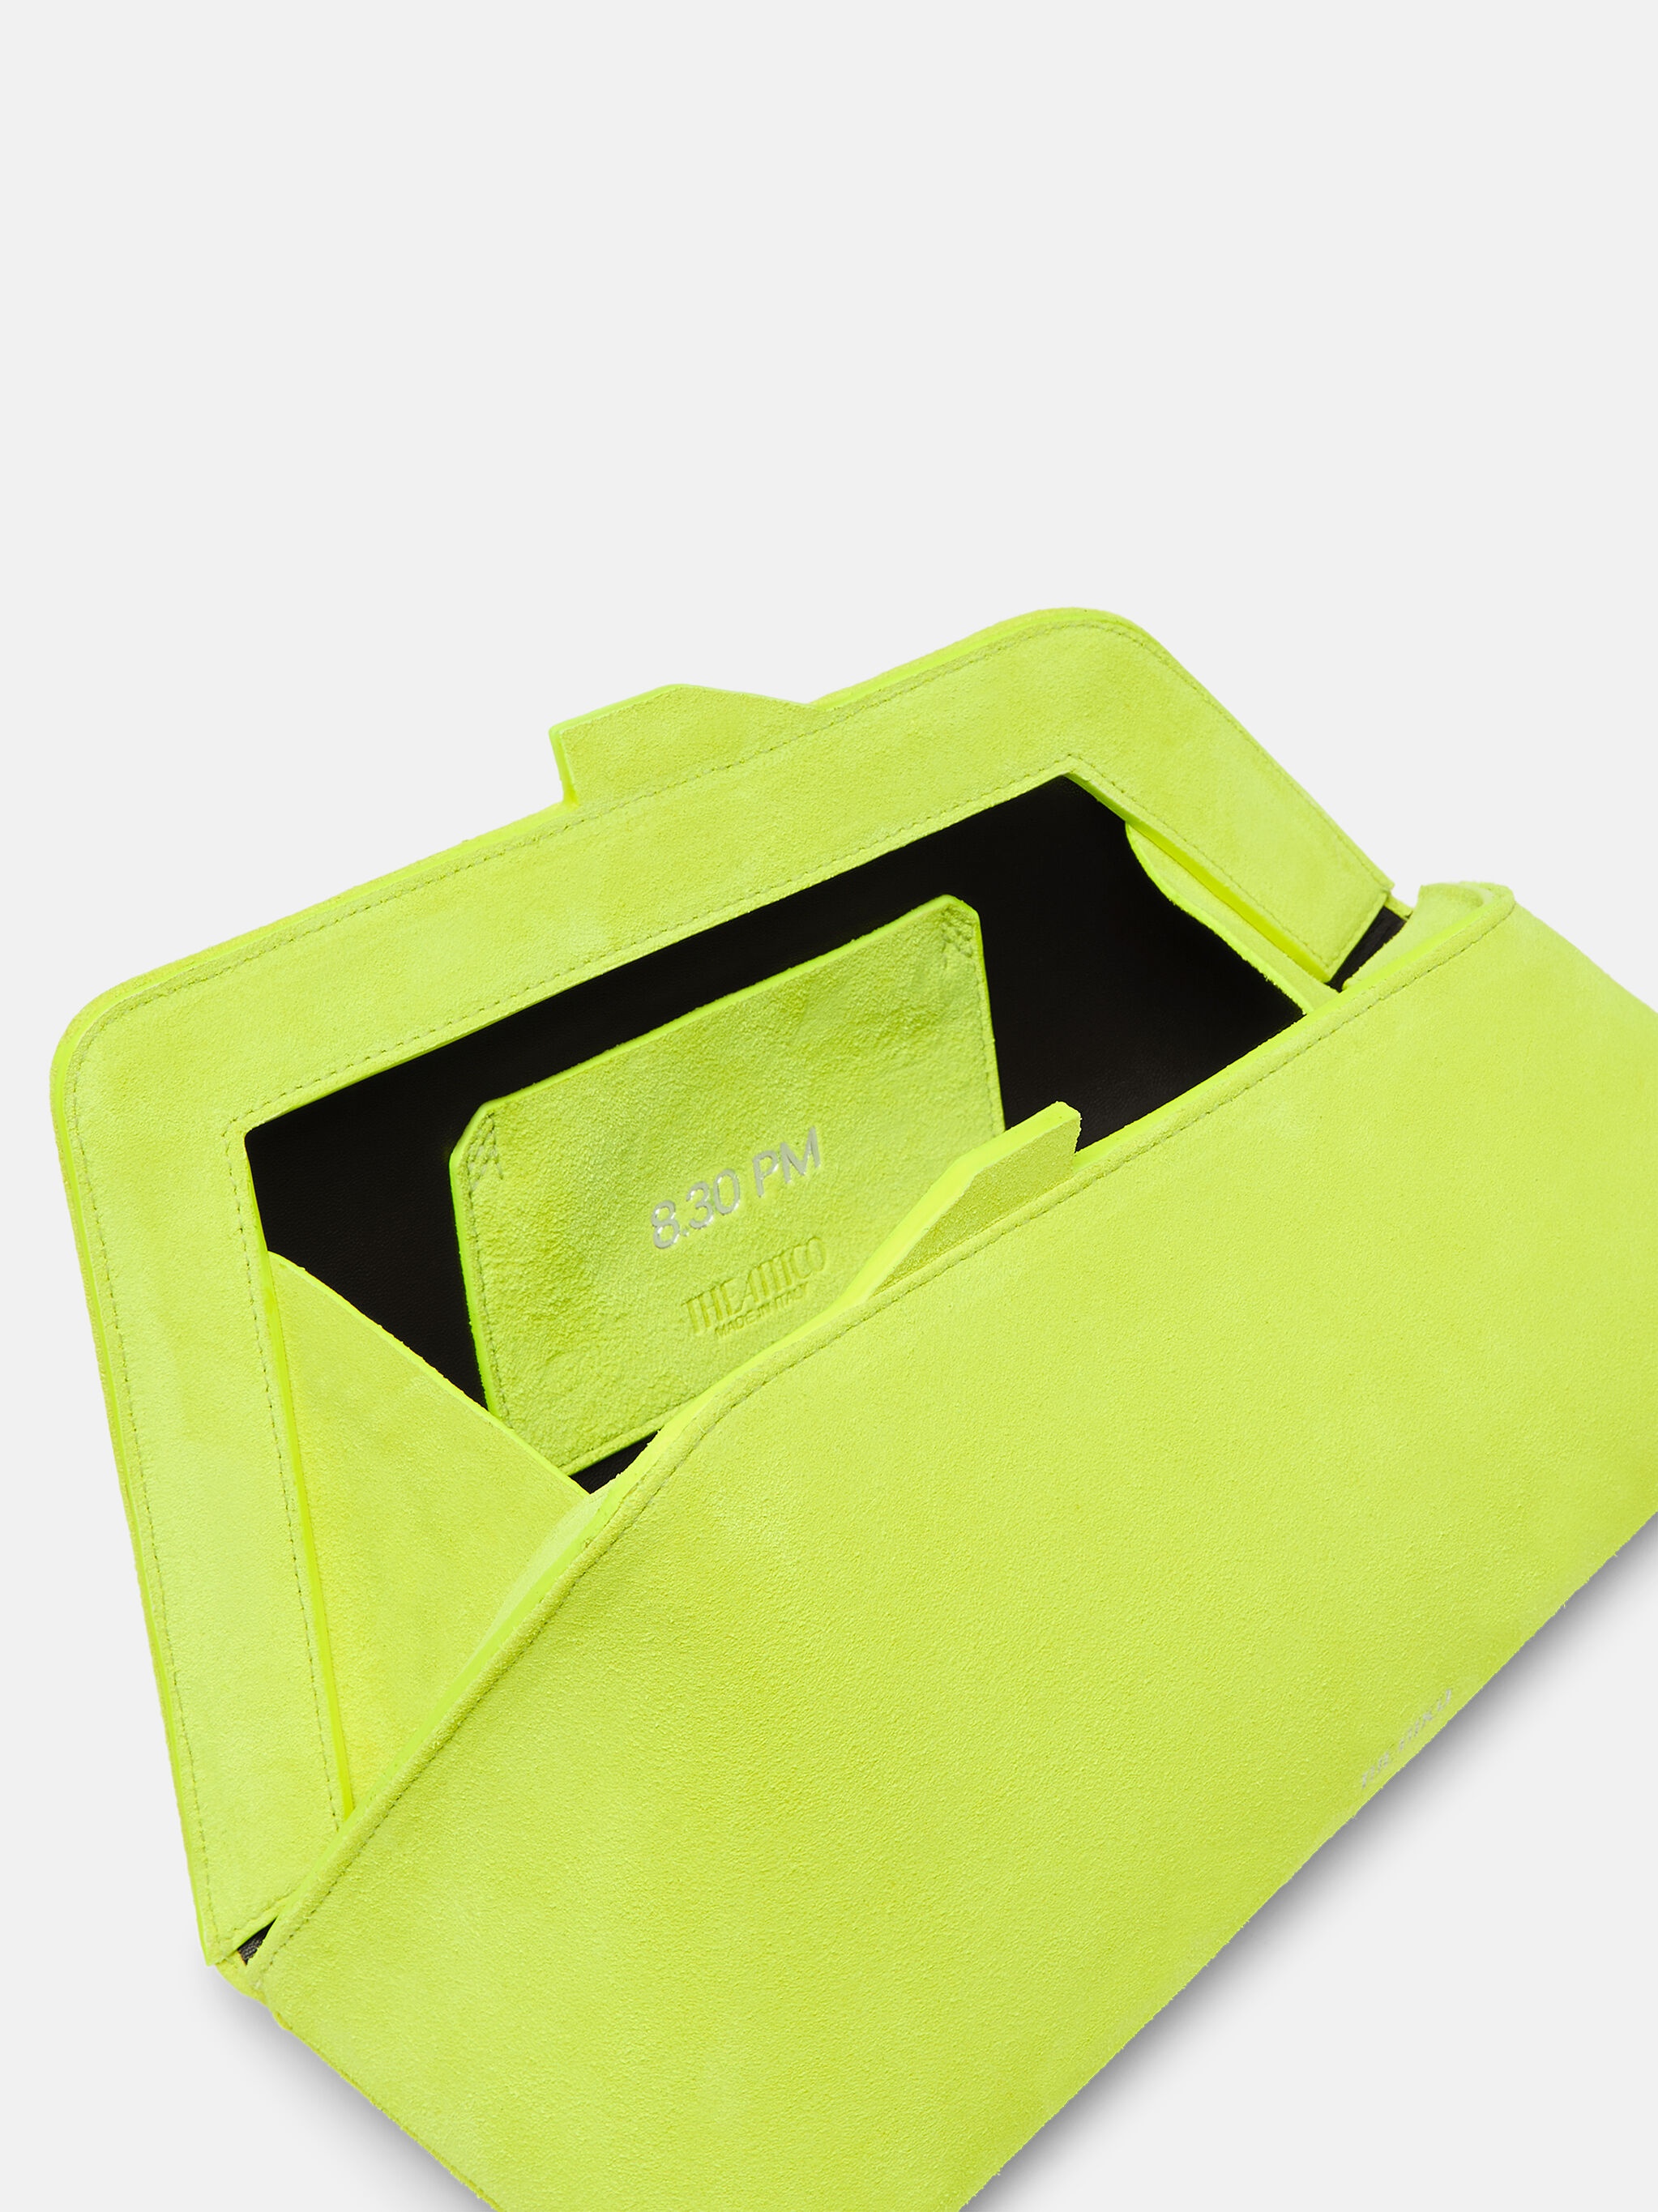 ''8.30PM'' FLUO YELLOW OVERSIZED CLUTCH - 3